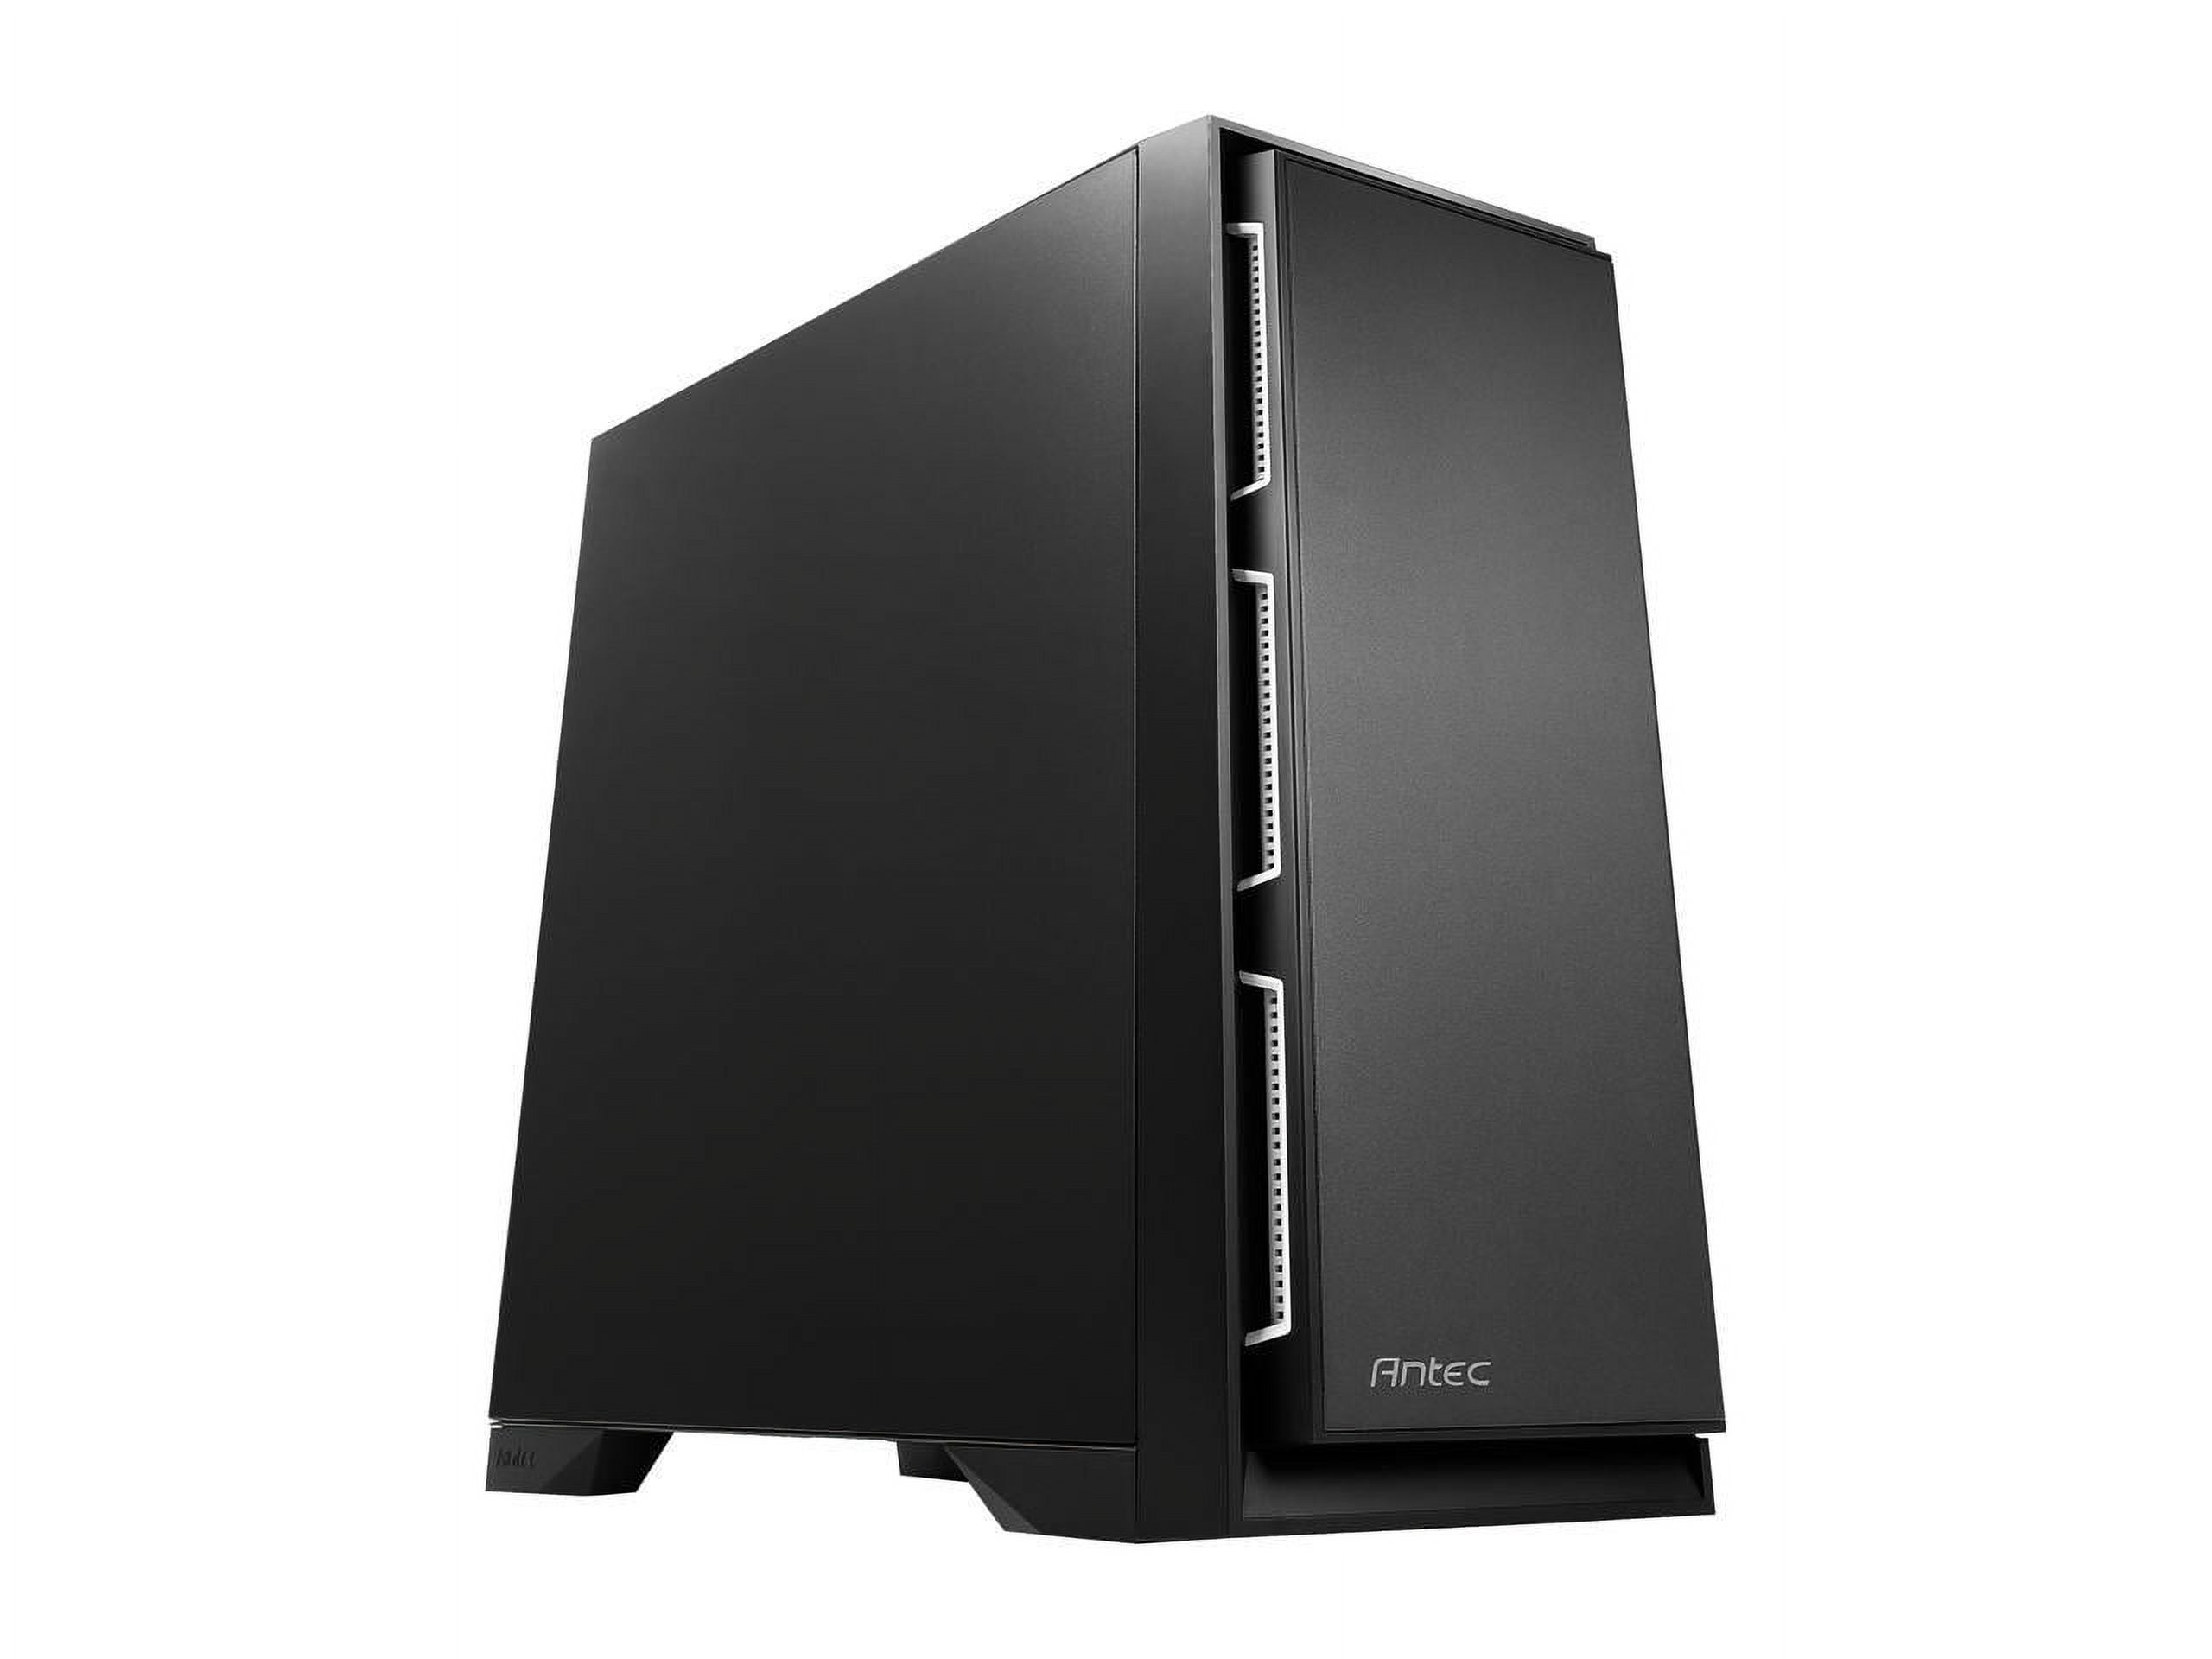 Antec Performance Series P101 Silent Black 0.8mm SPCC ATX Mid Tower Case with 8 x 3.5" HDD / 2.5" SSD Removable Bays - image 2 of 19